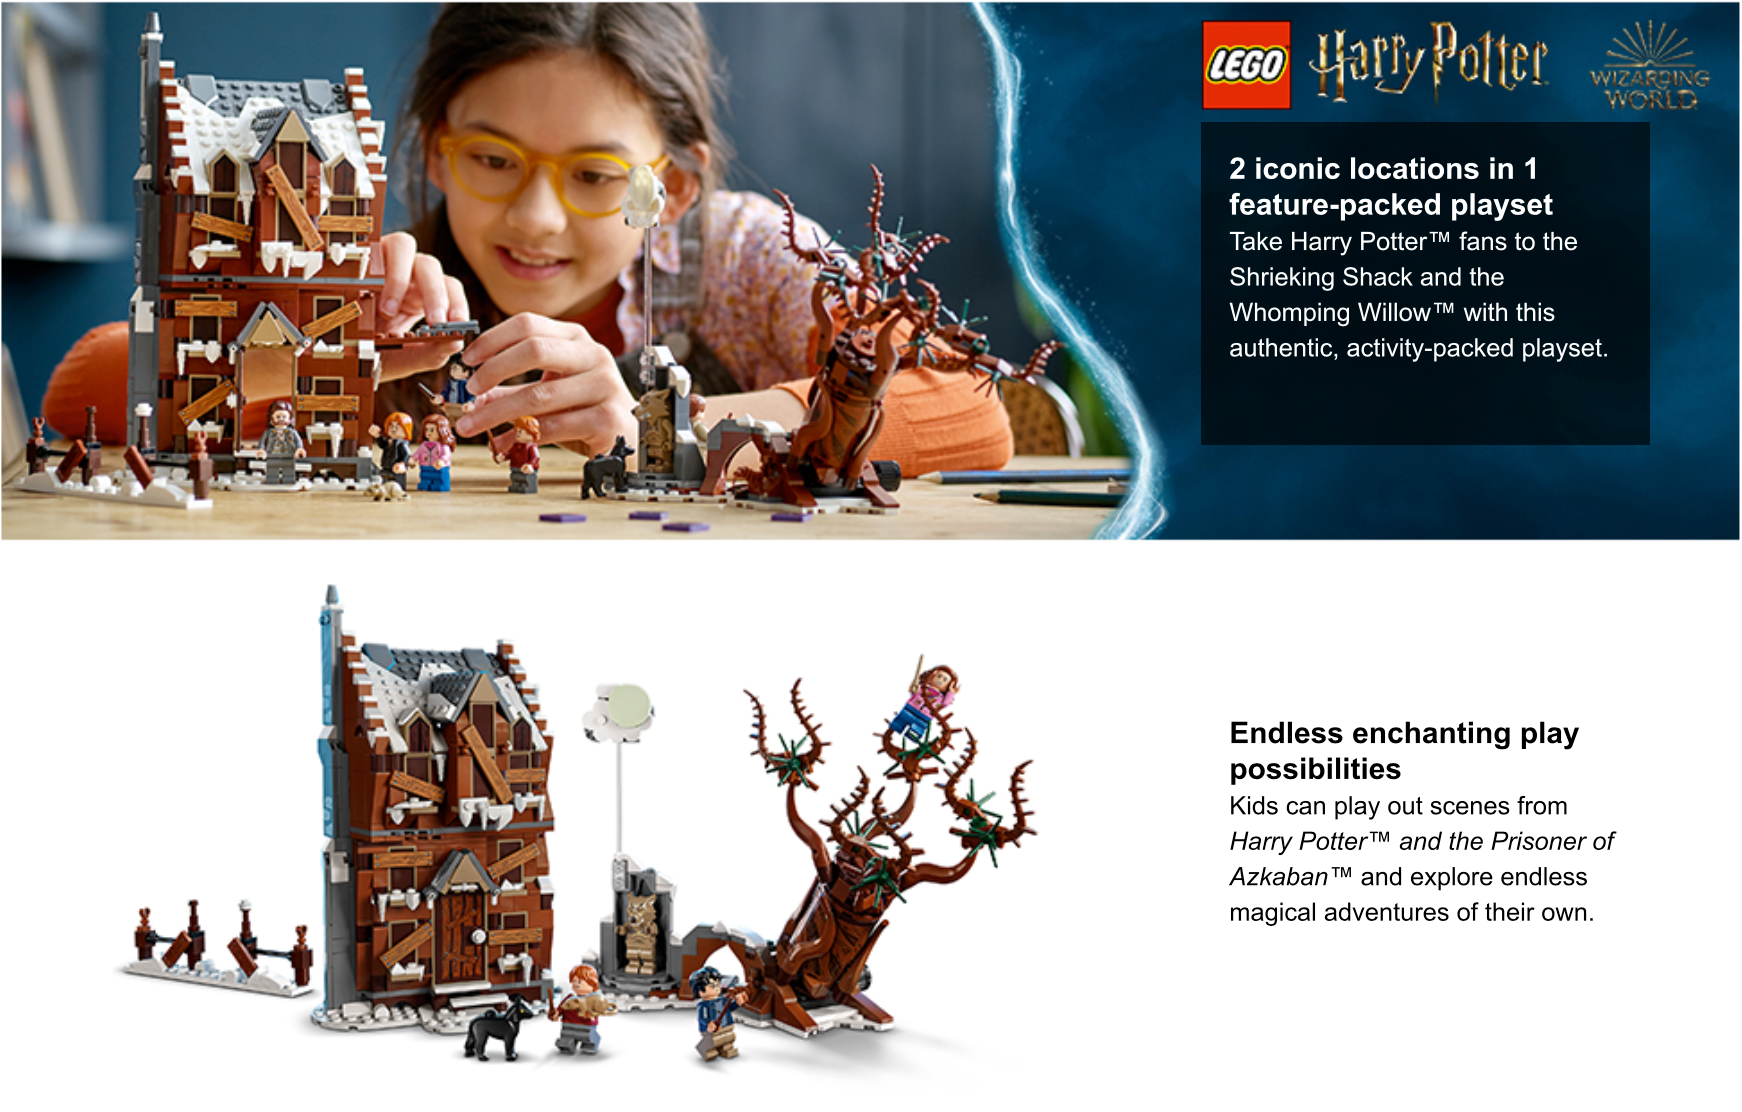 LEGO Harry Potter The Shrieking Shack & Whomping Willow 76407 2 in